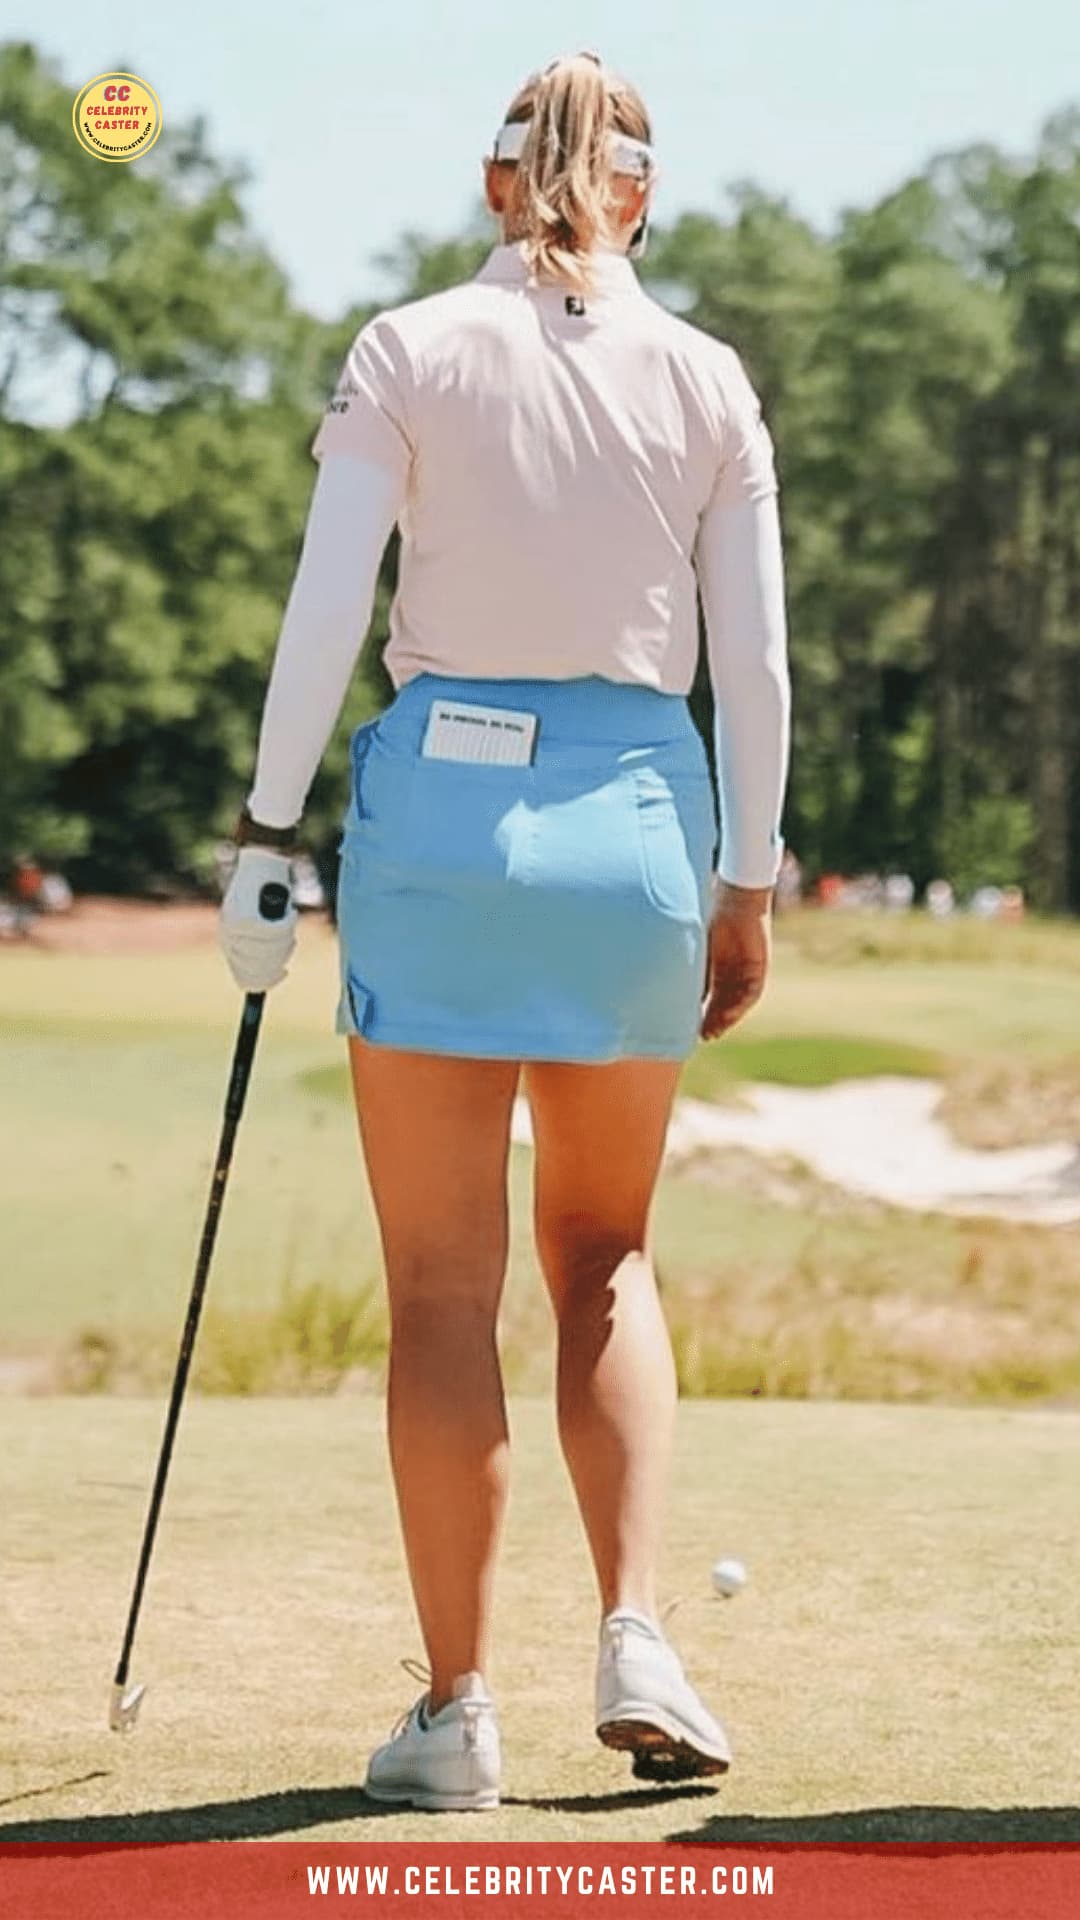 Here I am going to reveal a female golfer Nelly Korda height and other body measurements like Nelly Korda weight, Nelly Korda age and Nelly Korda Net Worth!